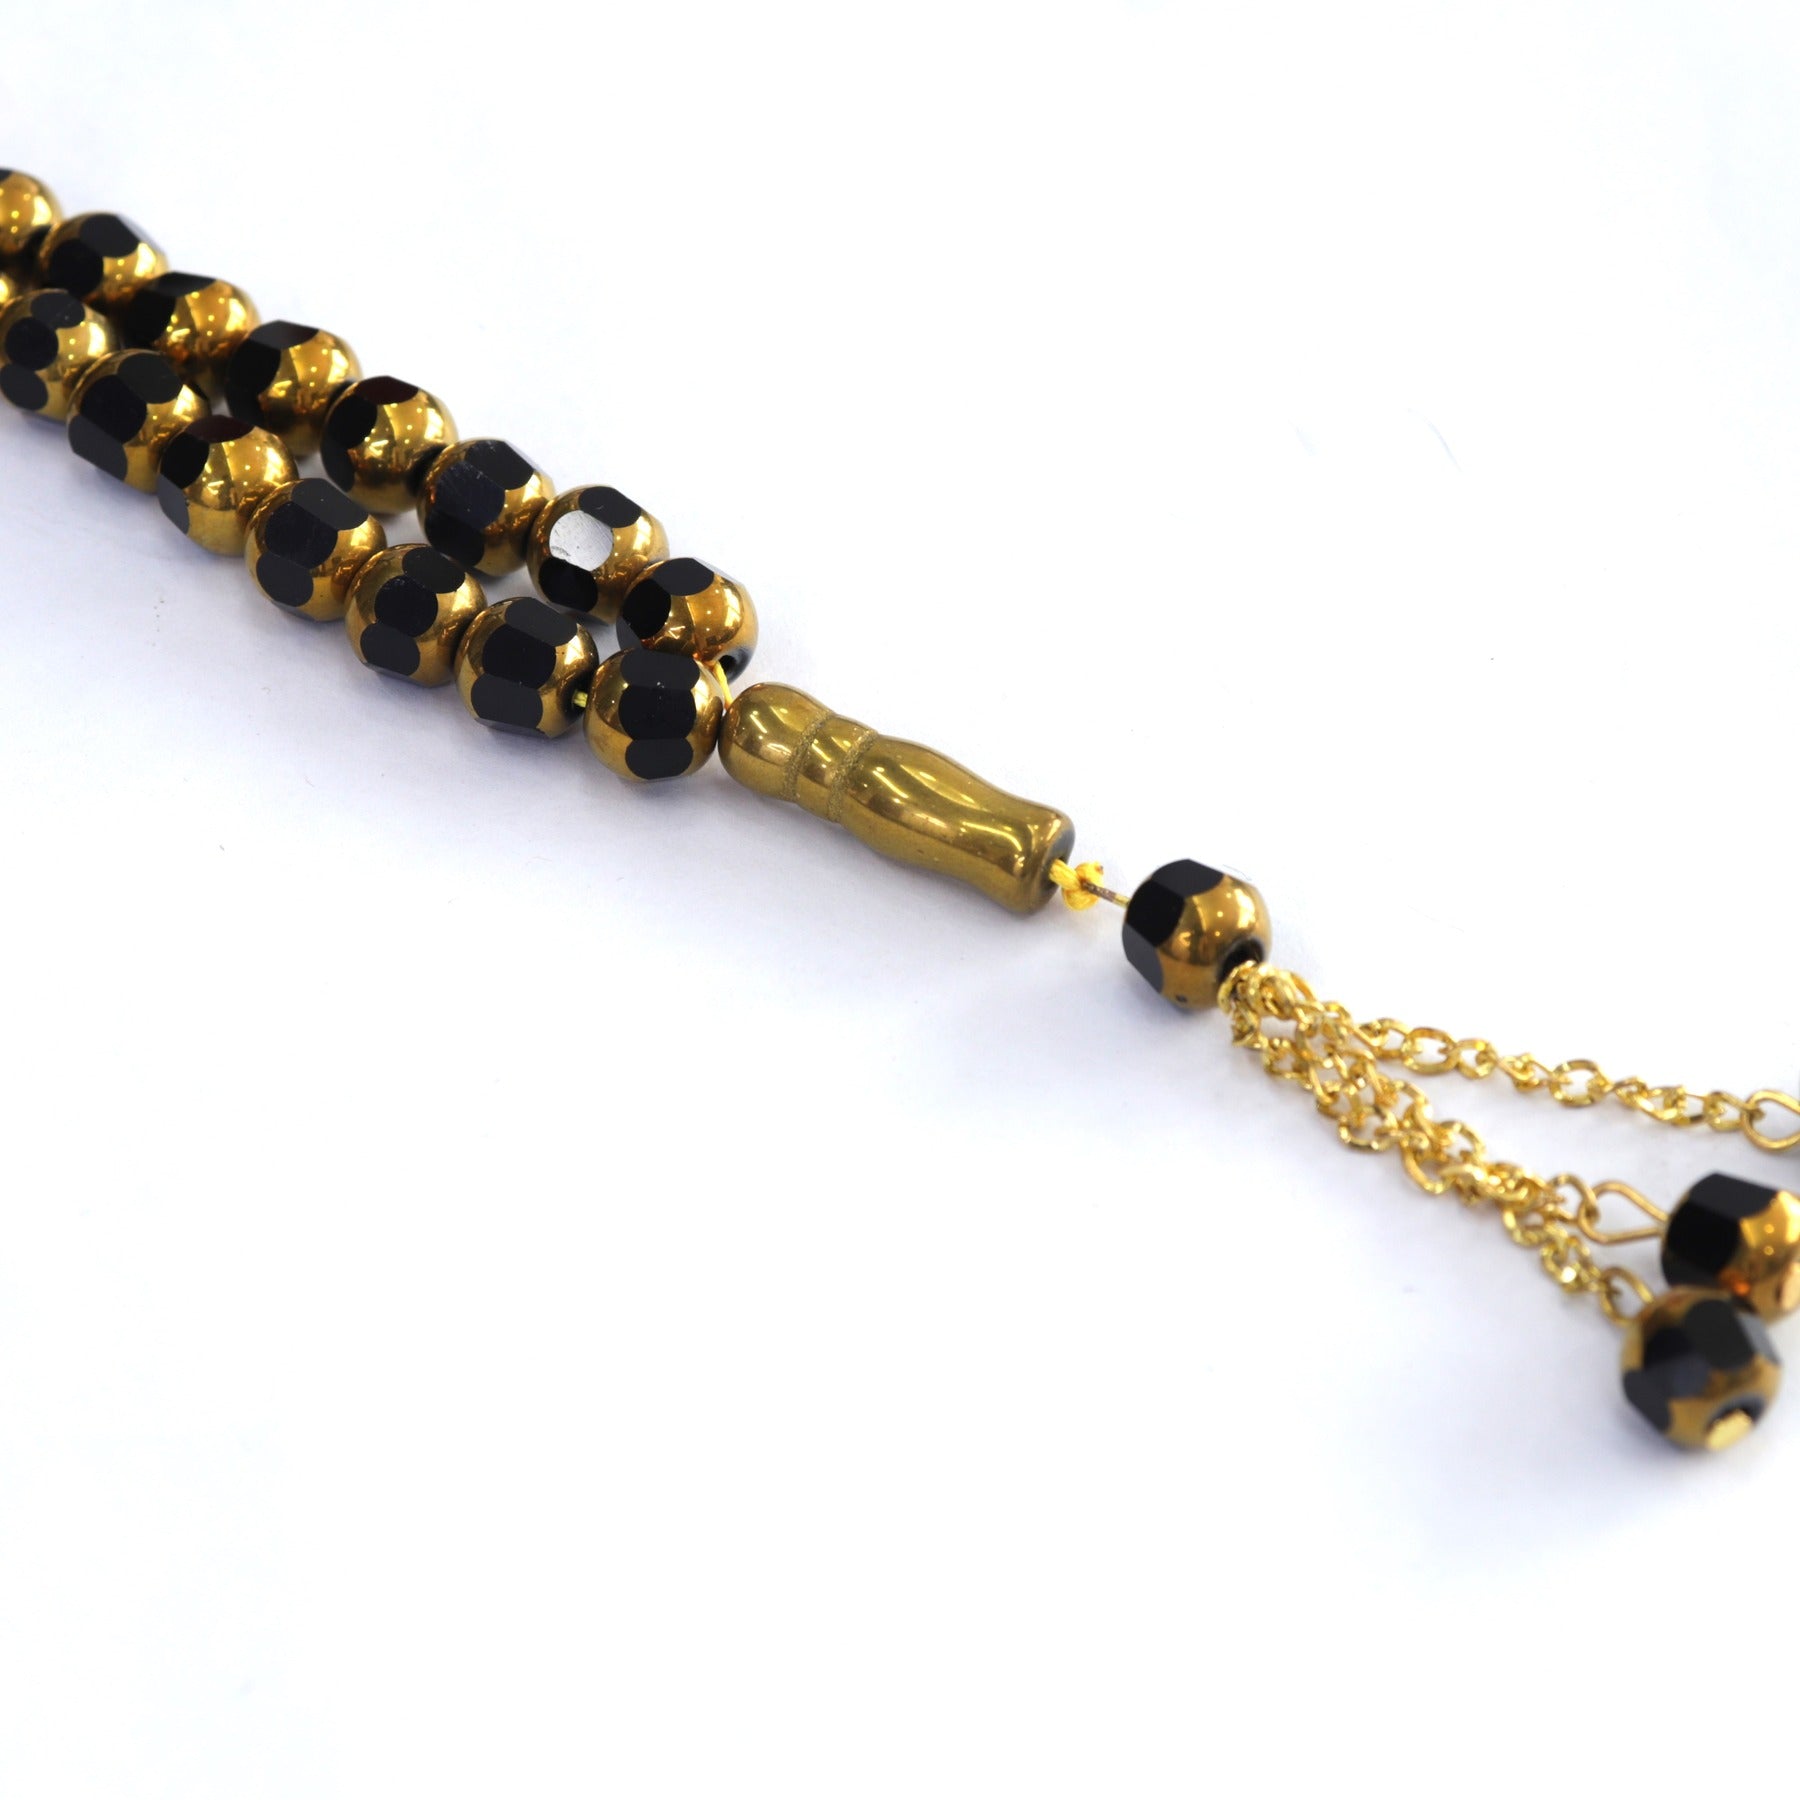 Small and Shiny Black With Gold Prayer Tasbeeh 33 Beads